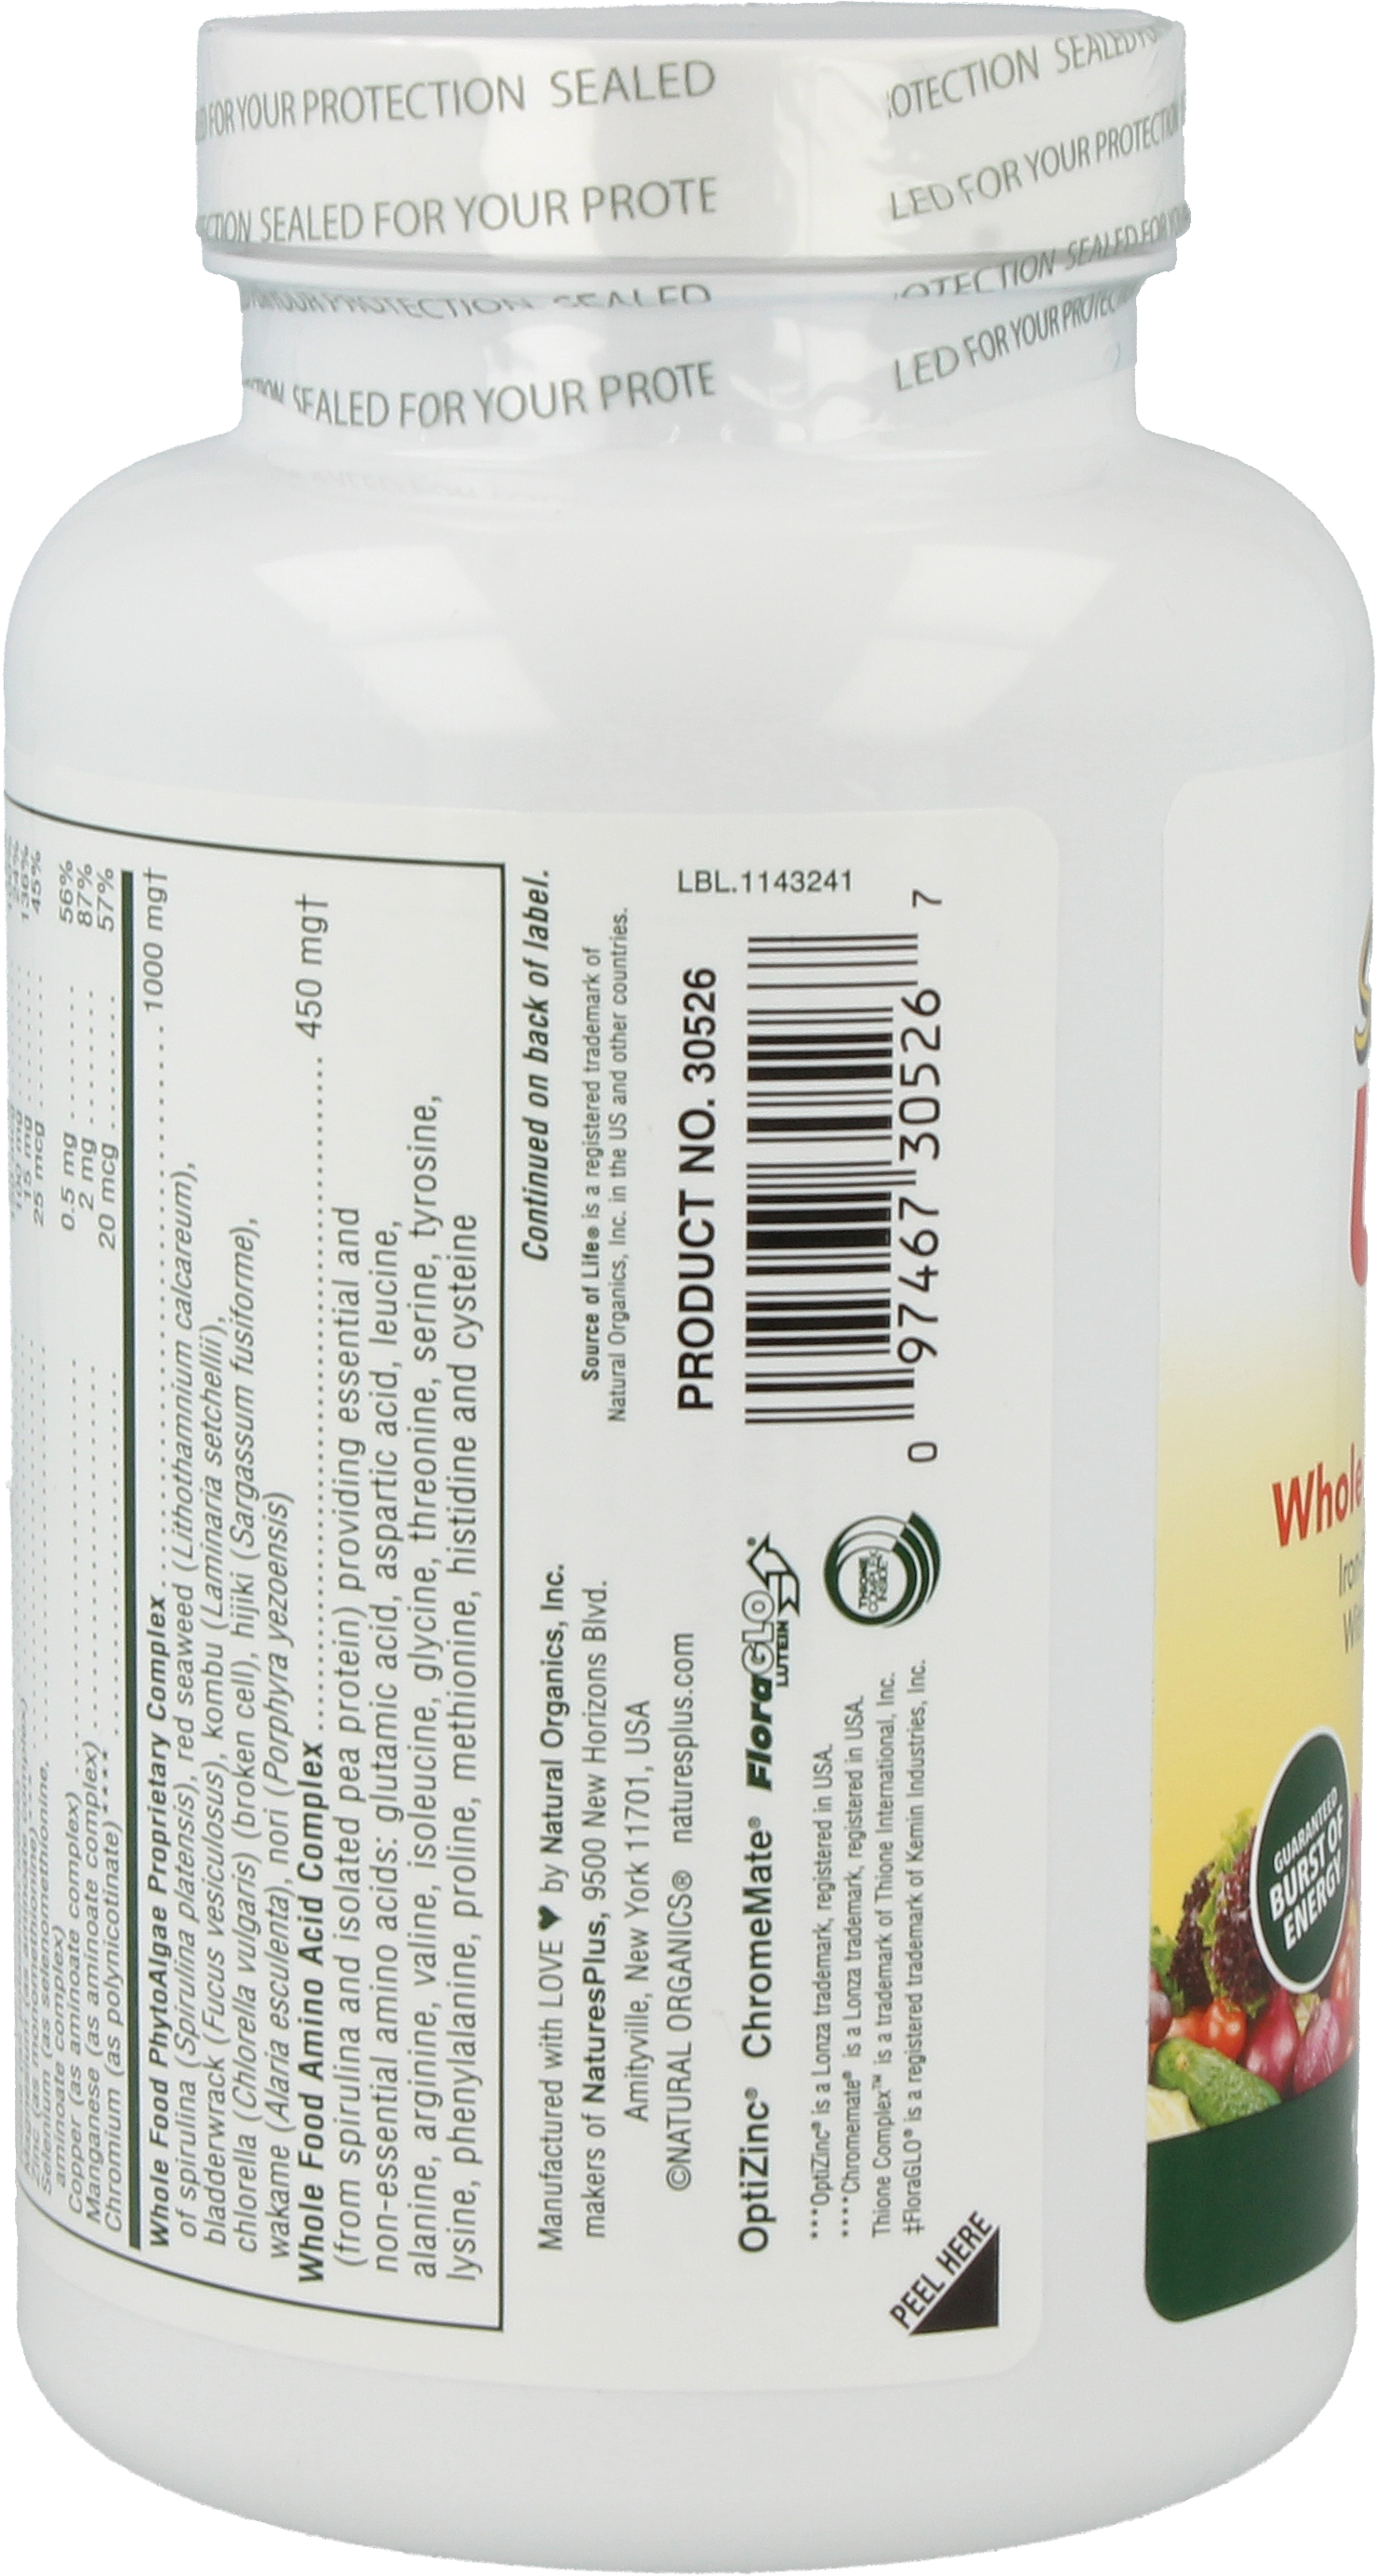 Ultra Source of Life® No Iron Tabletten 